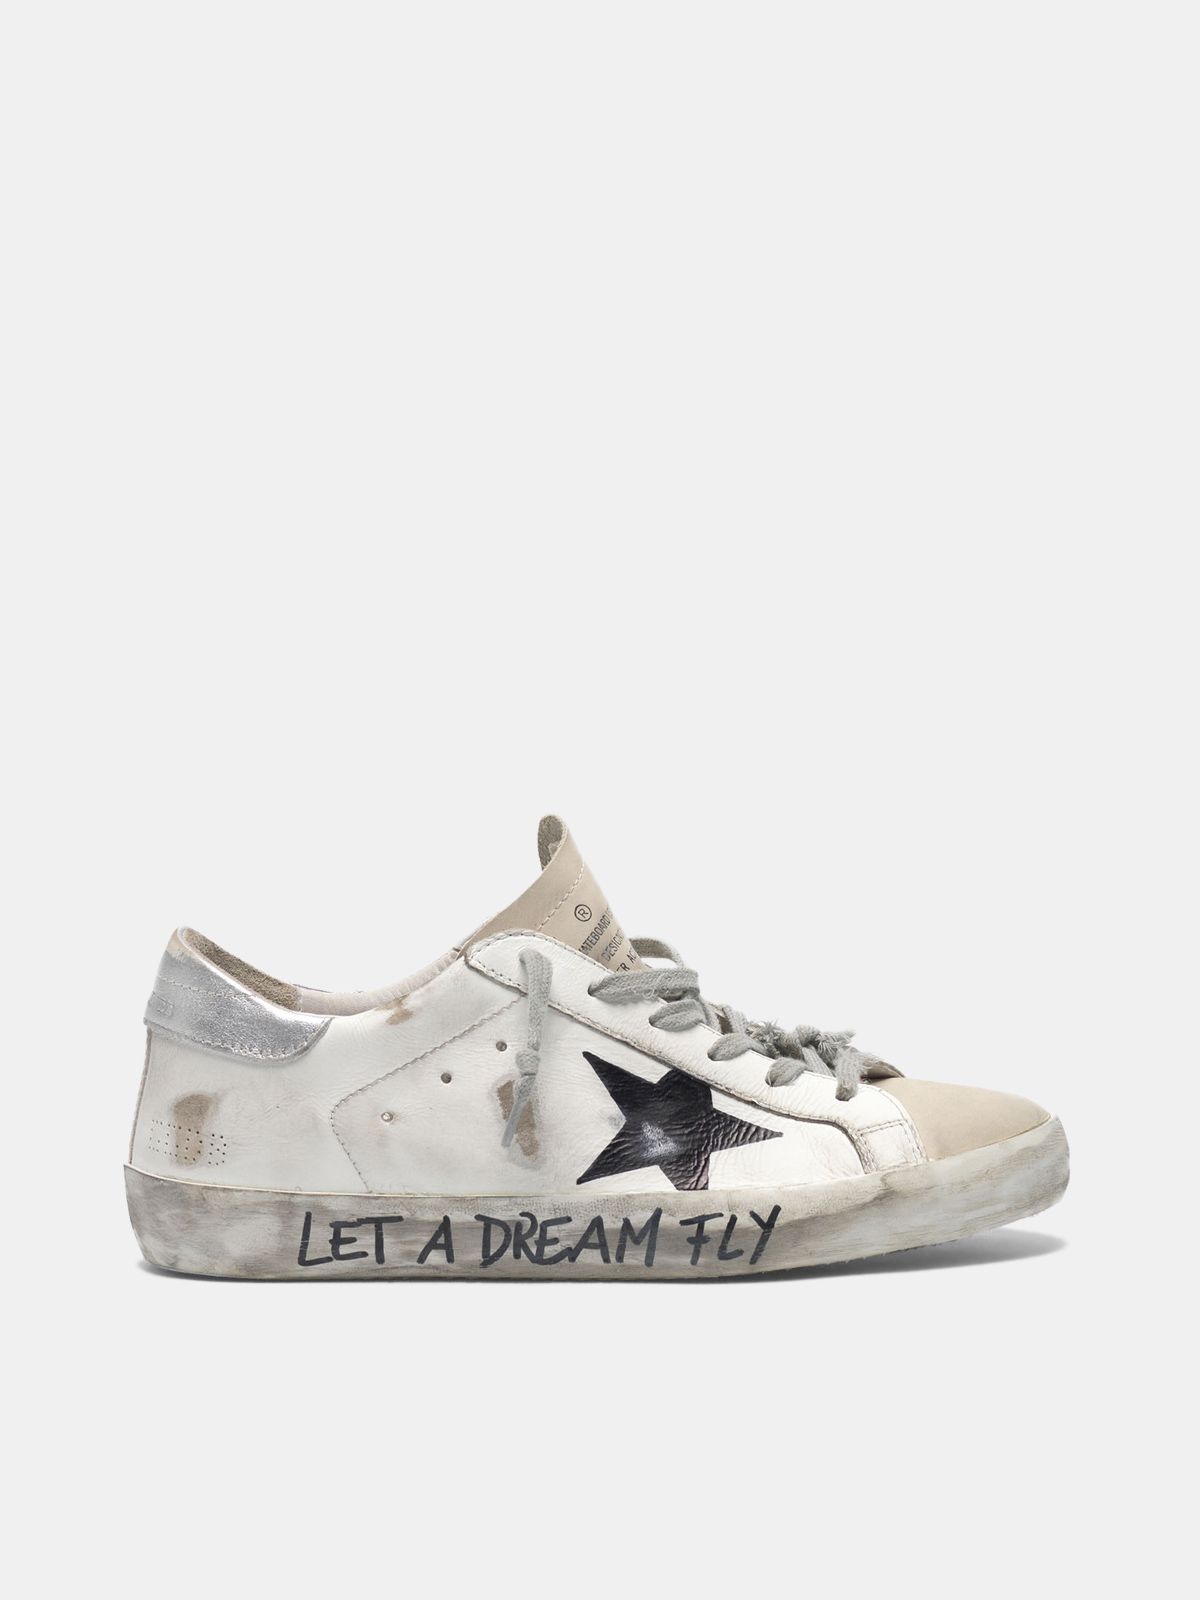 Super-Star sneakers in leather with \u0026#34;Let a dream fly\u0026#34; lettering | Golden  Goose